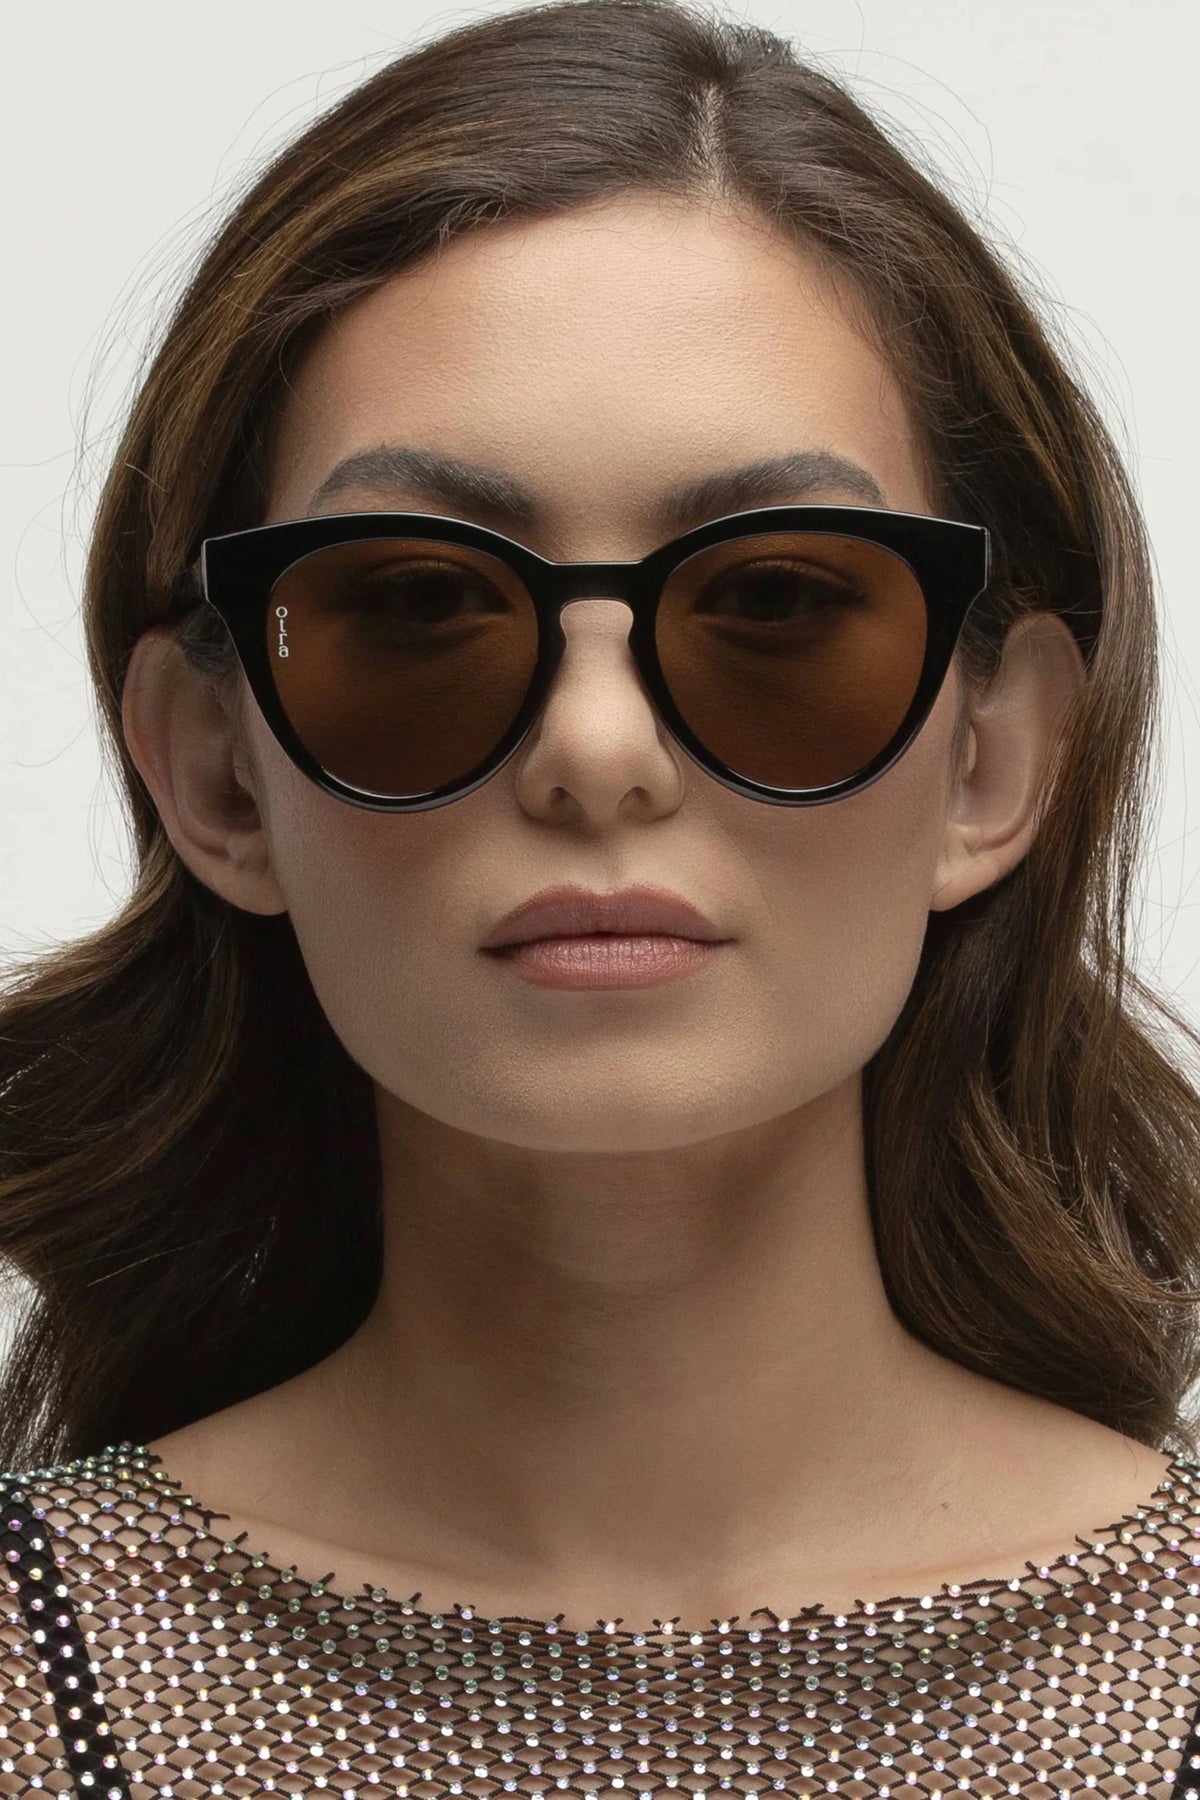 Lily Black Brown Sunnies